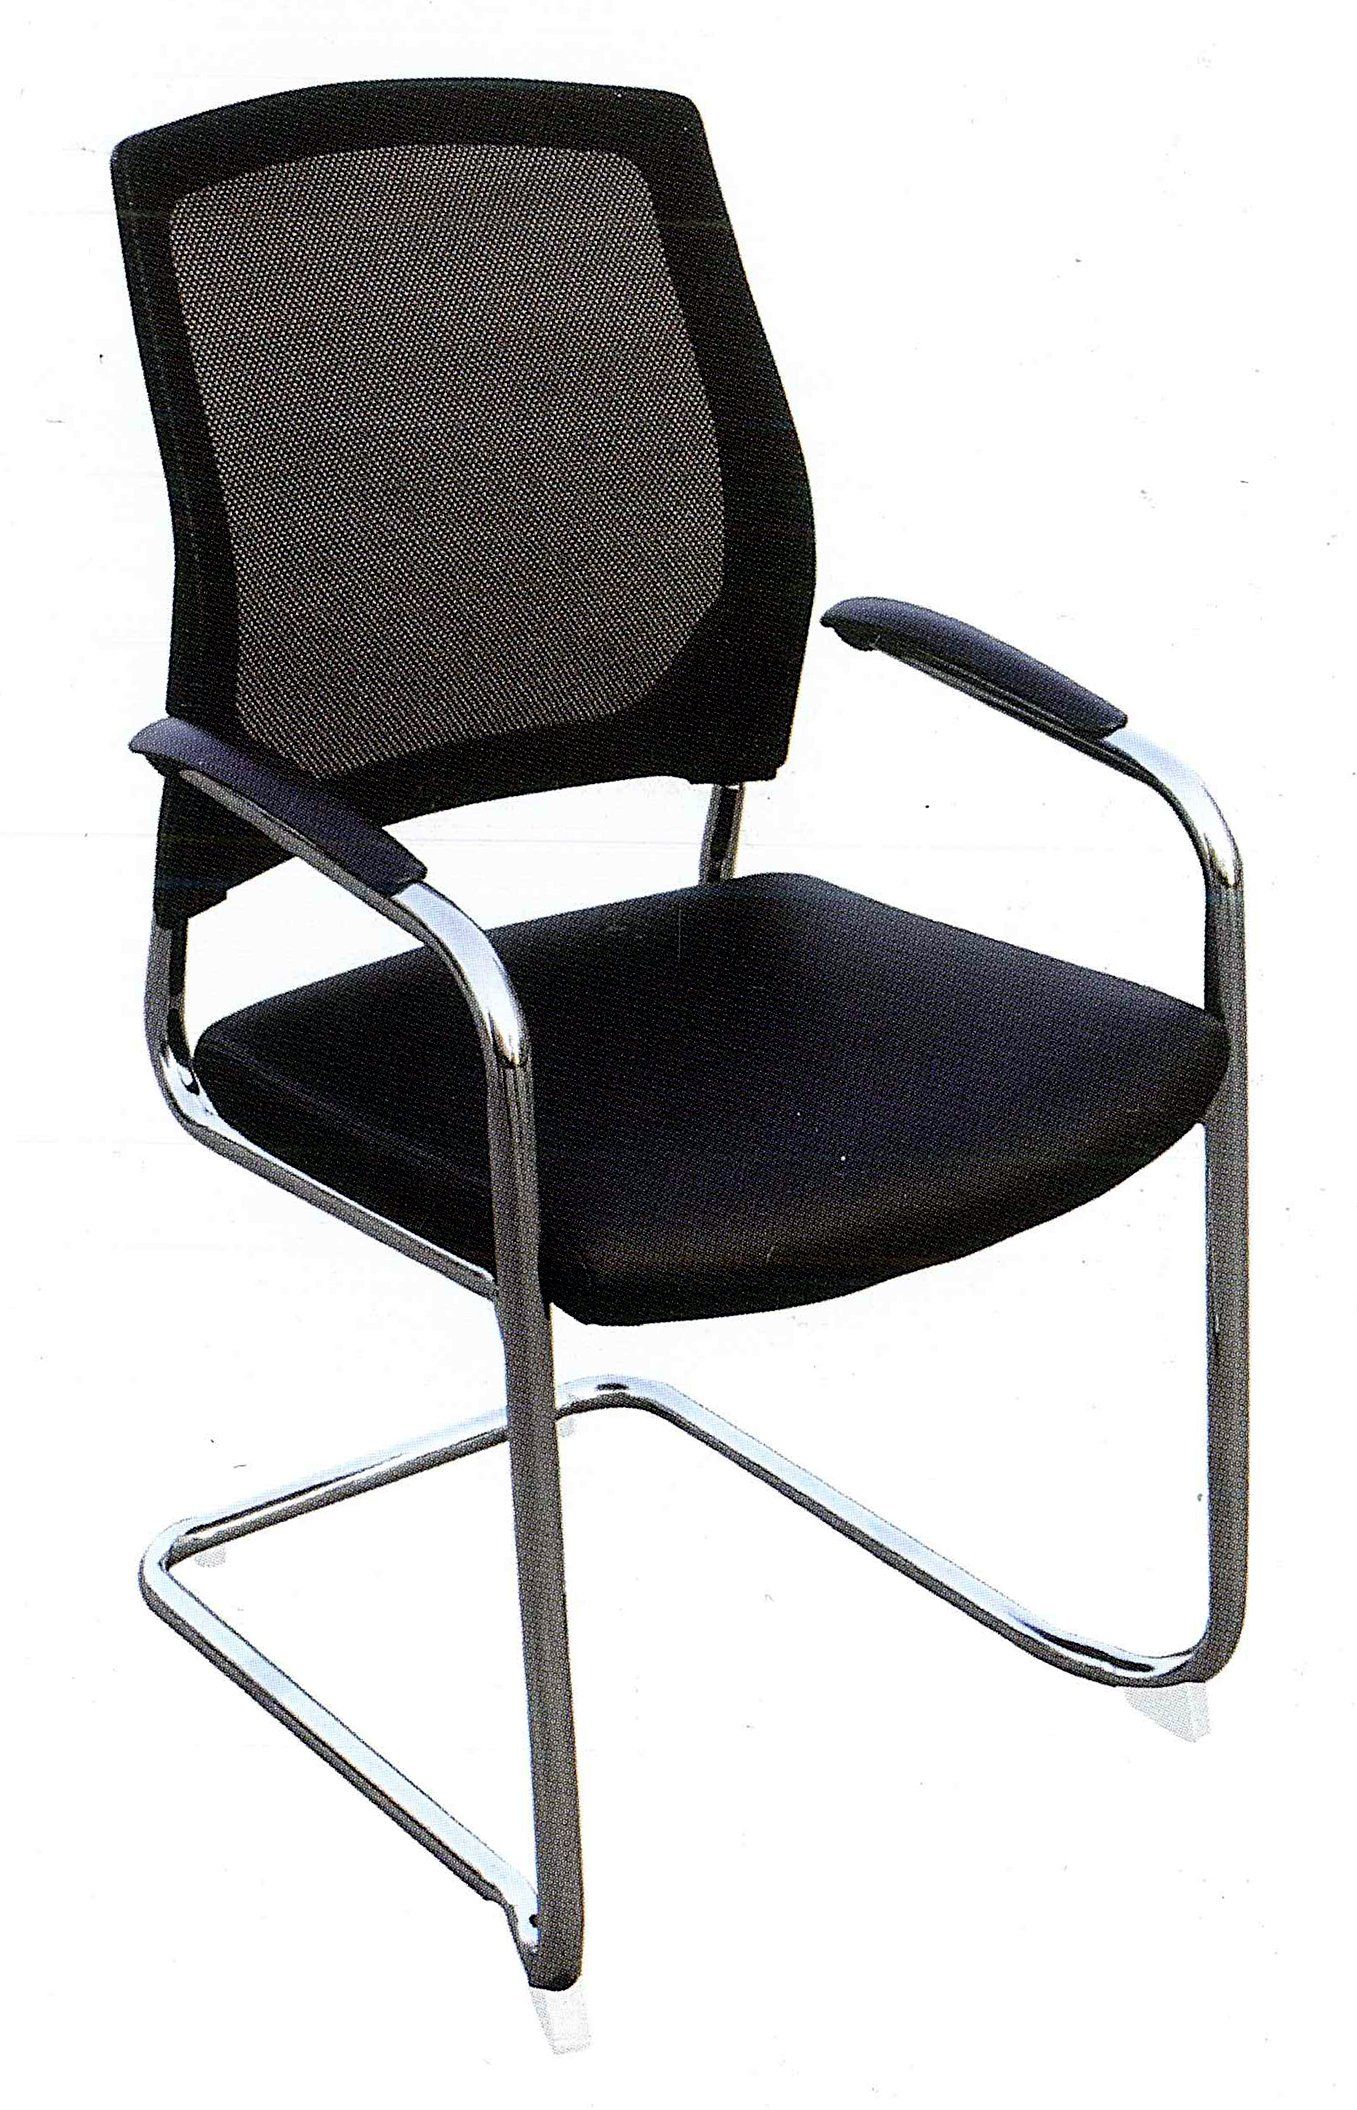 LTC13A visitor chair with cantilever base